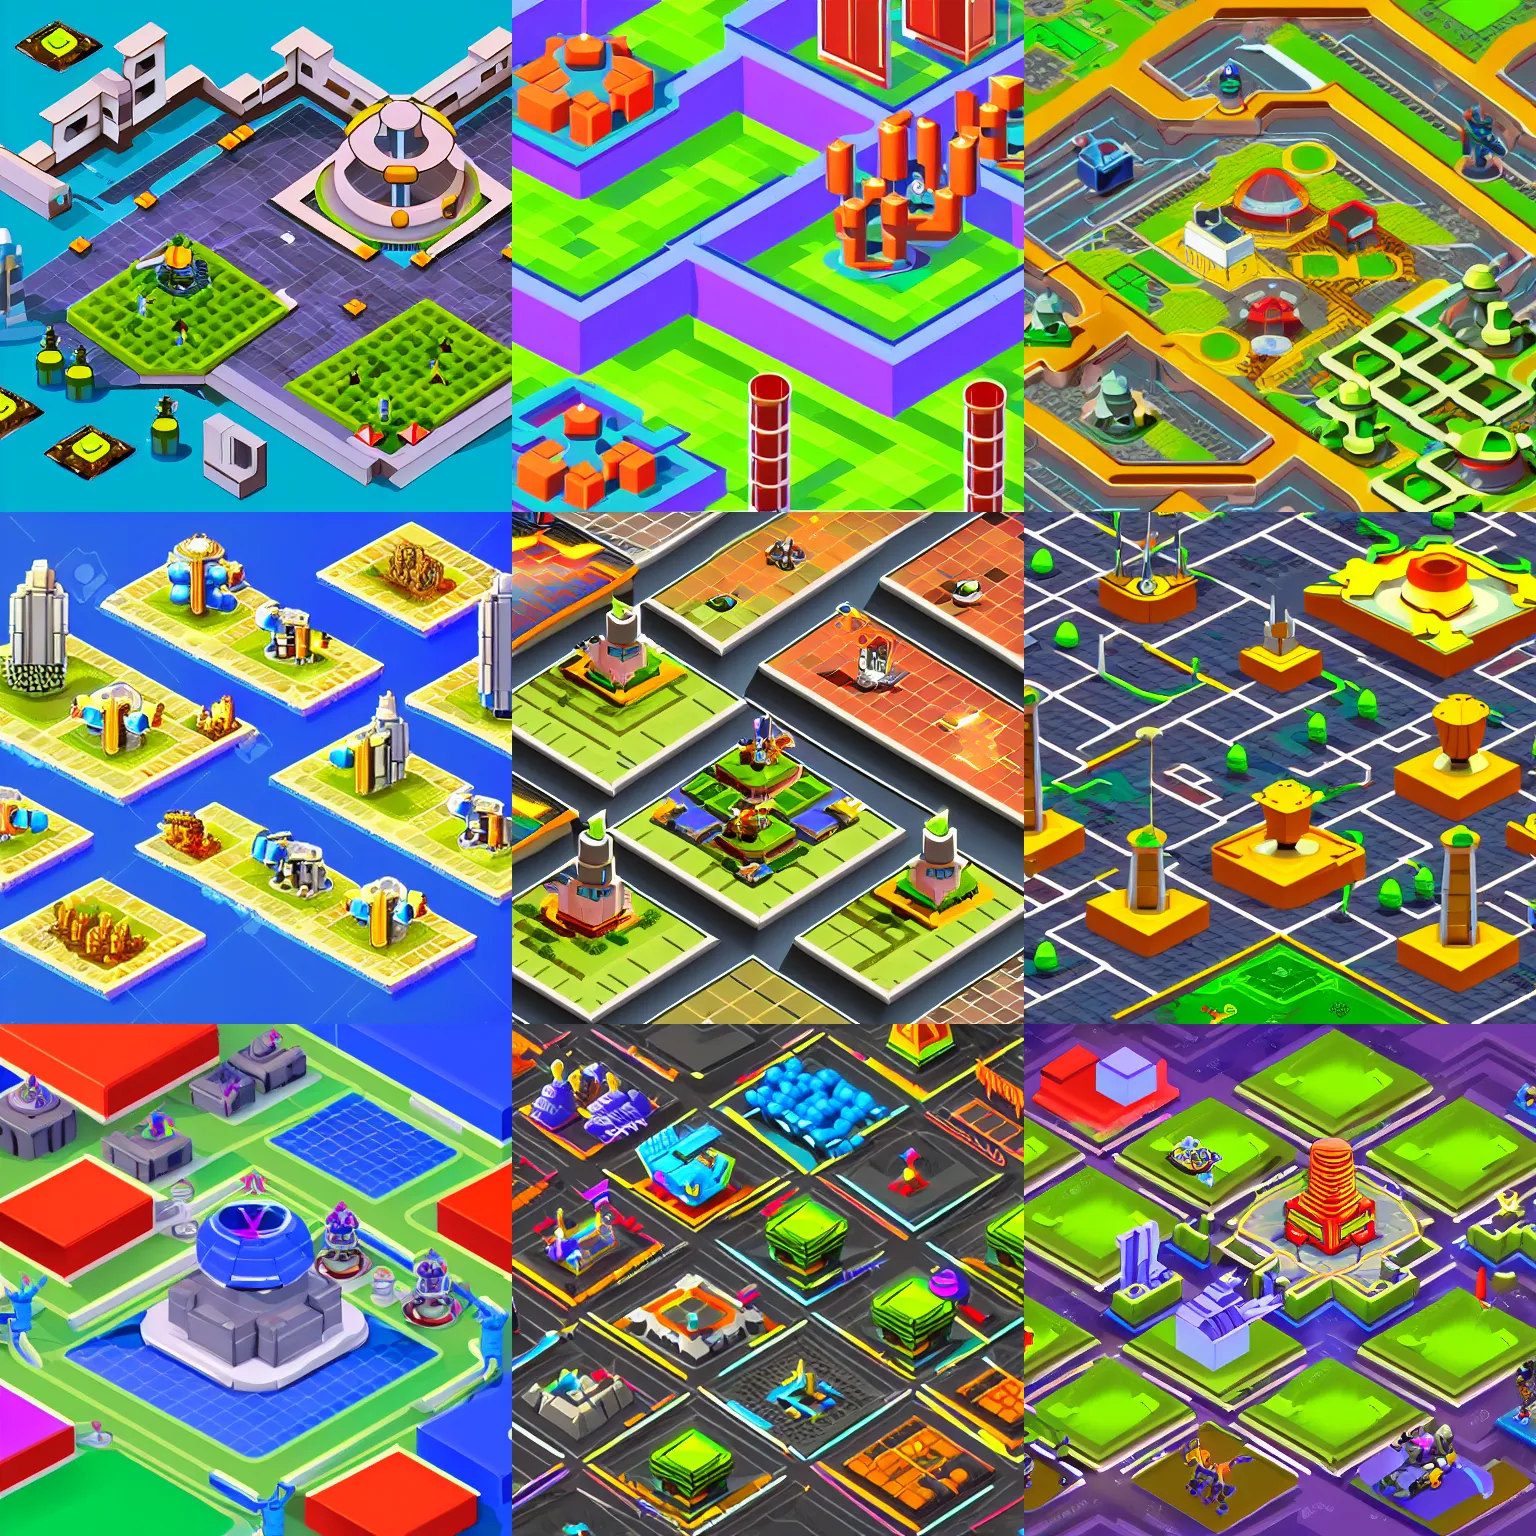 Prompt: a retro futuristic tower defense game isometric high quality render with vivid colors and multiple types of towers guarding the path